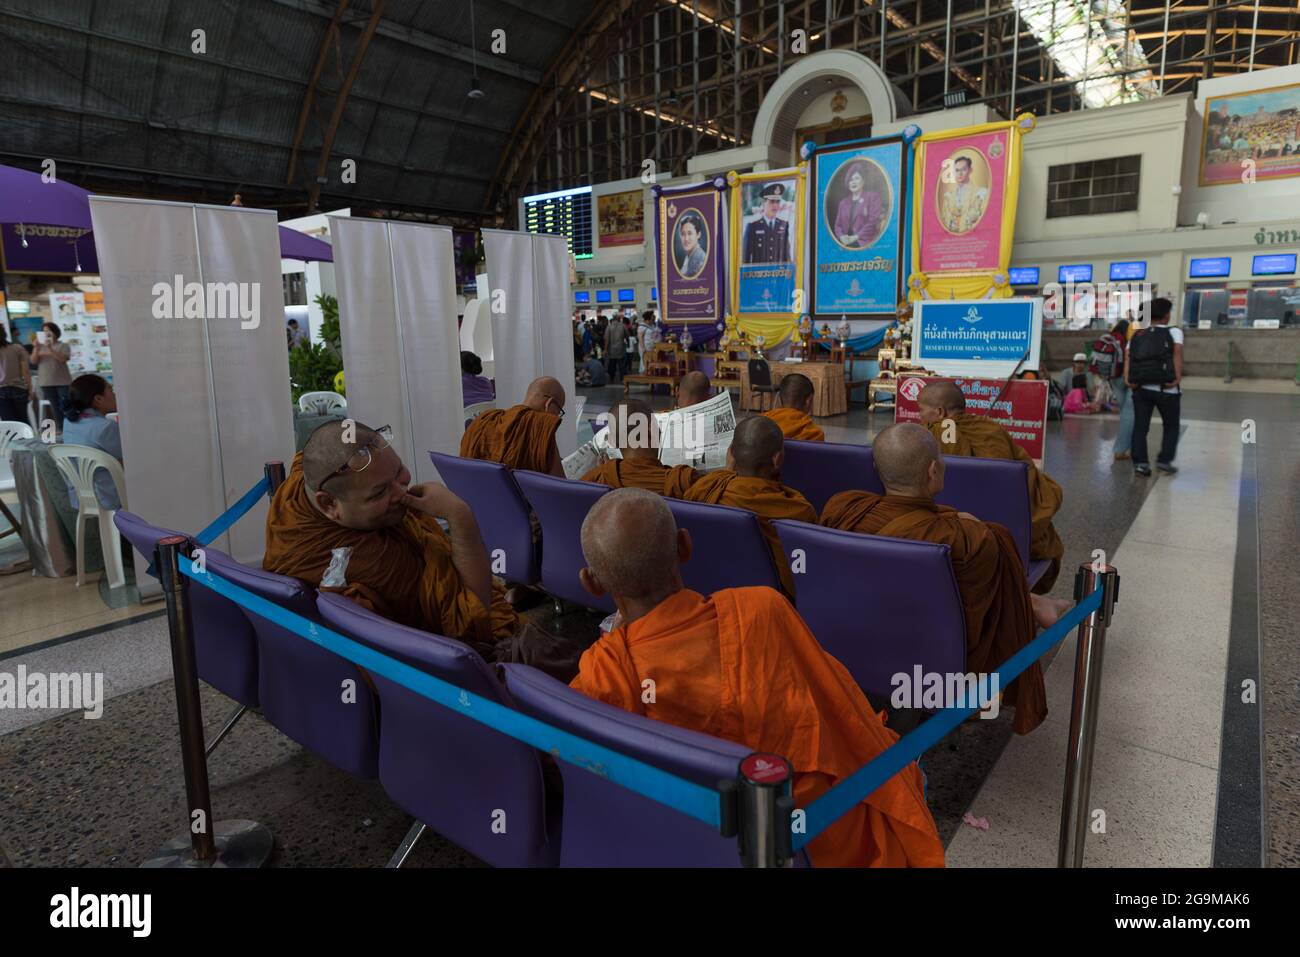 Reserved place for Buddhist monks in Hua Lamphong railway station. Stock Photo